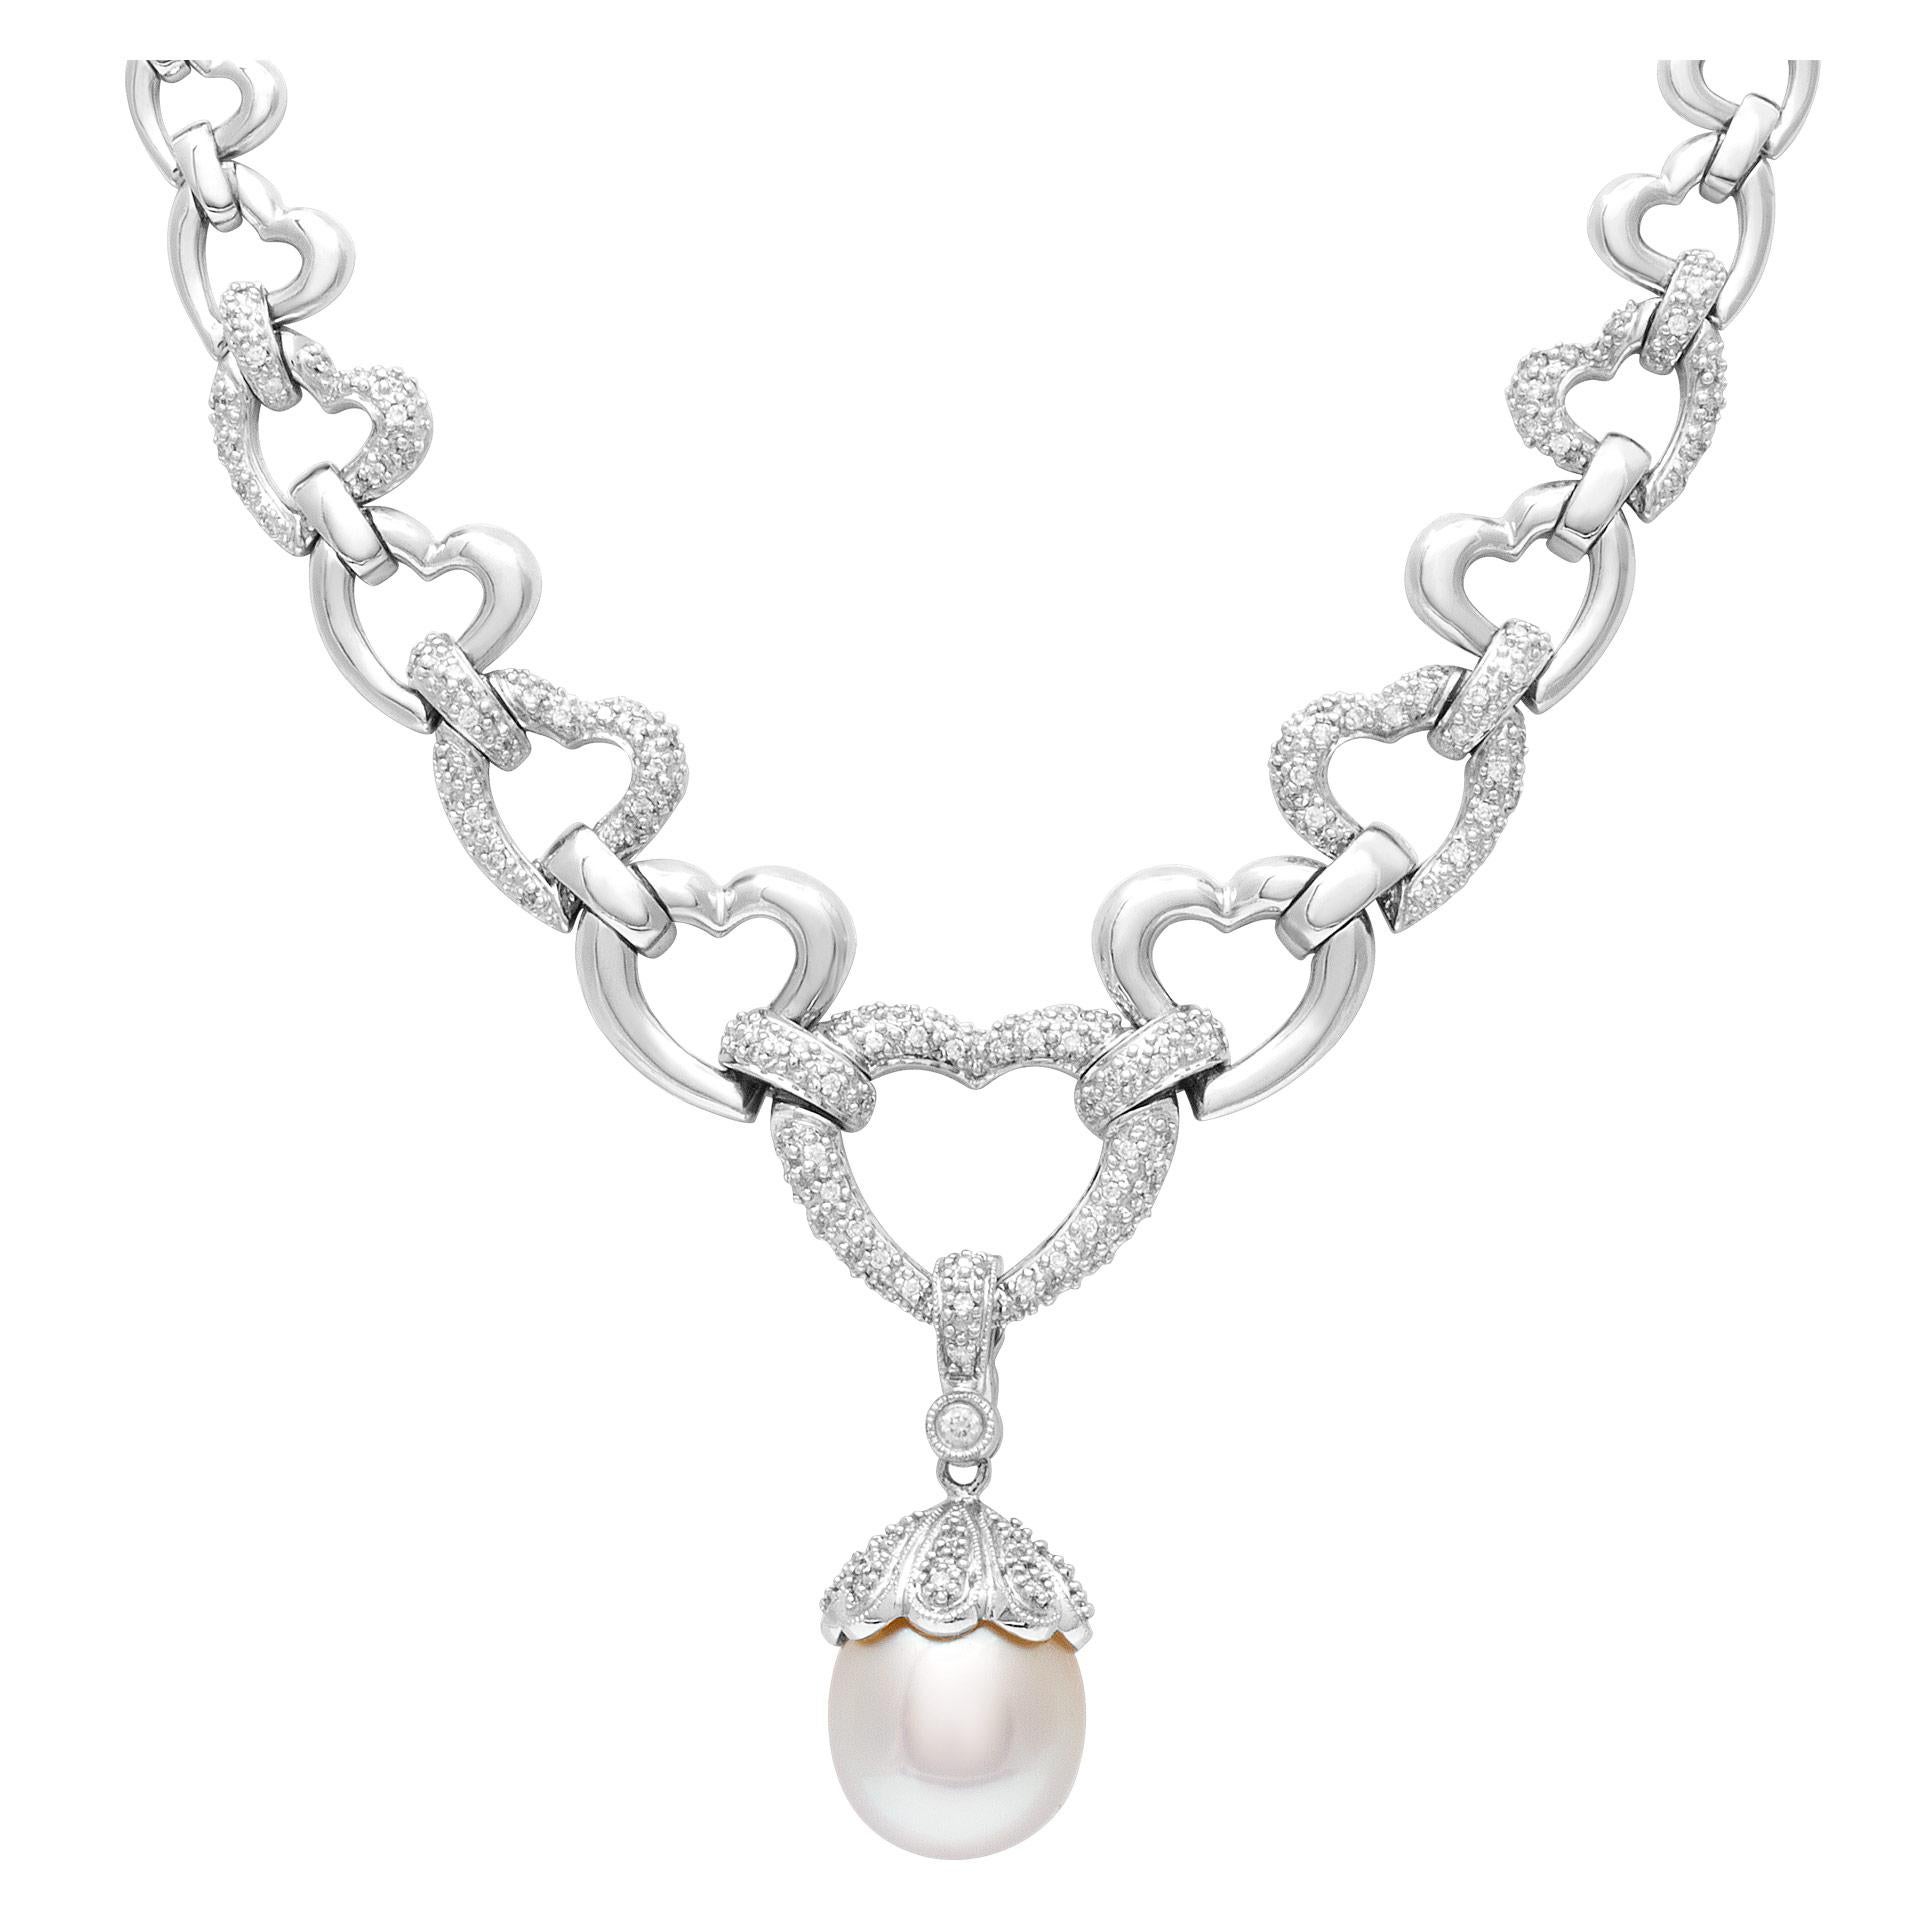 ESTIMATED RETAIL: $8,390 YOUR PRICE: $5,220 - Elegant heart link necklace in 14k white gold with 12mm South Sea cultured pearl with silver overtone accented with over 1 carat in diamond accents. 18